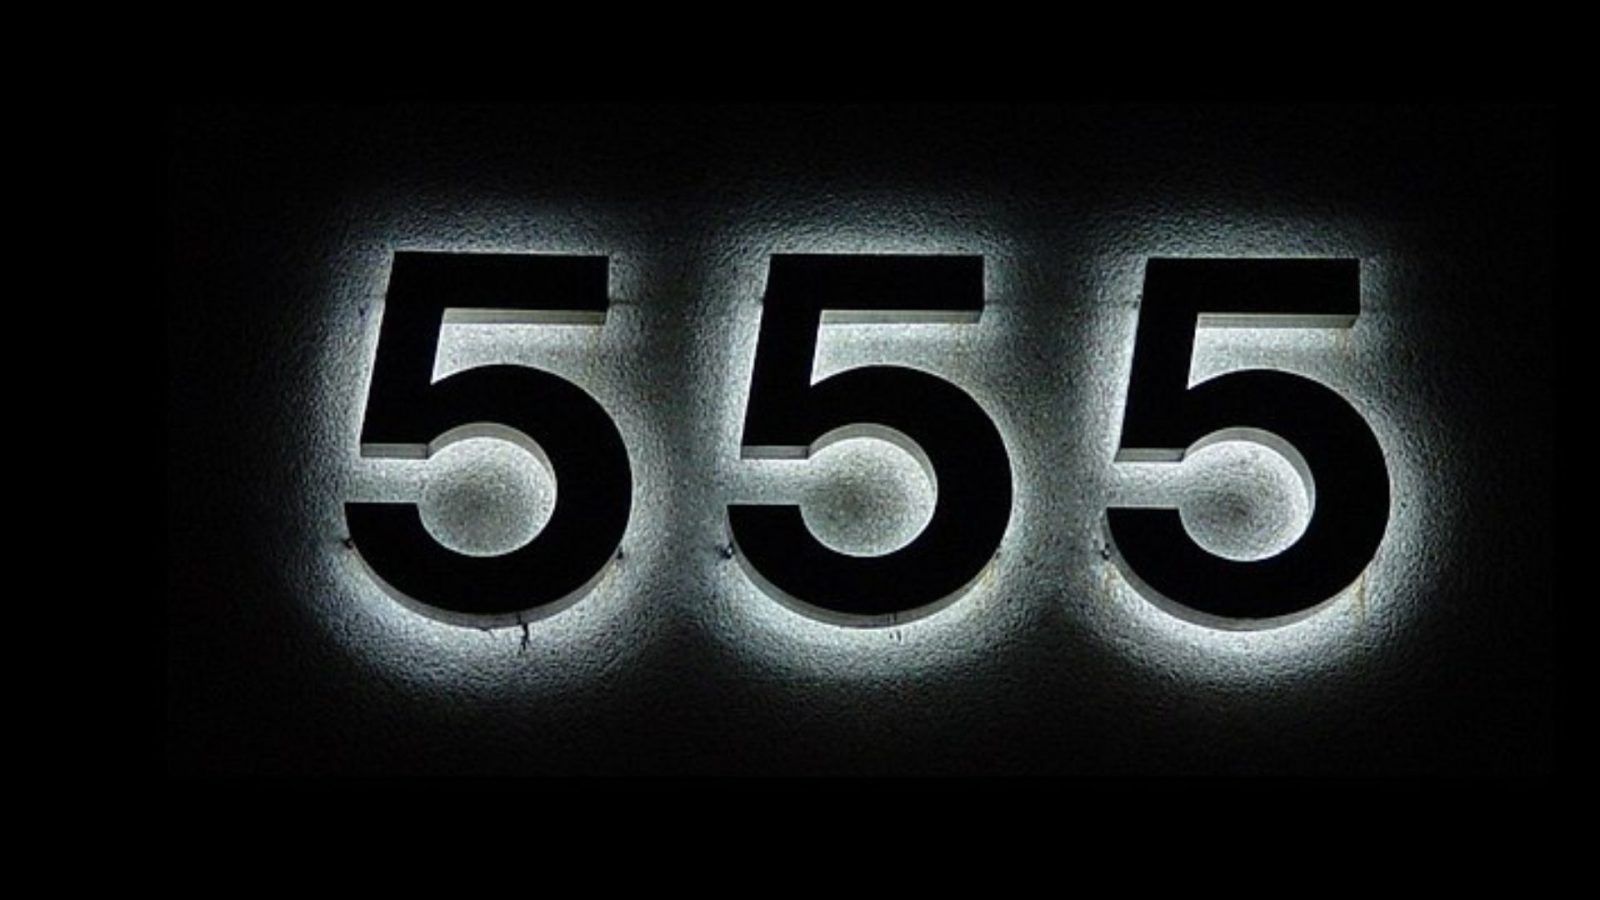 55 Angel Number Meaning, Love, Marriage, Career, Health and